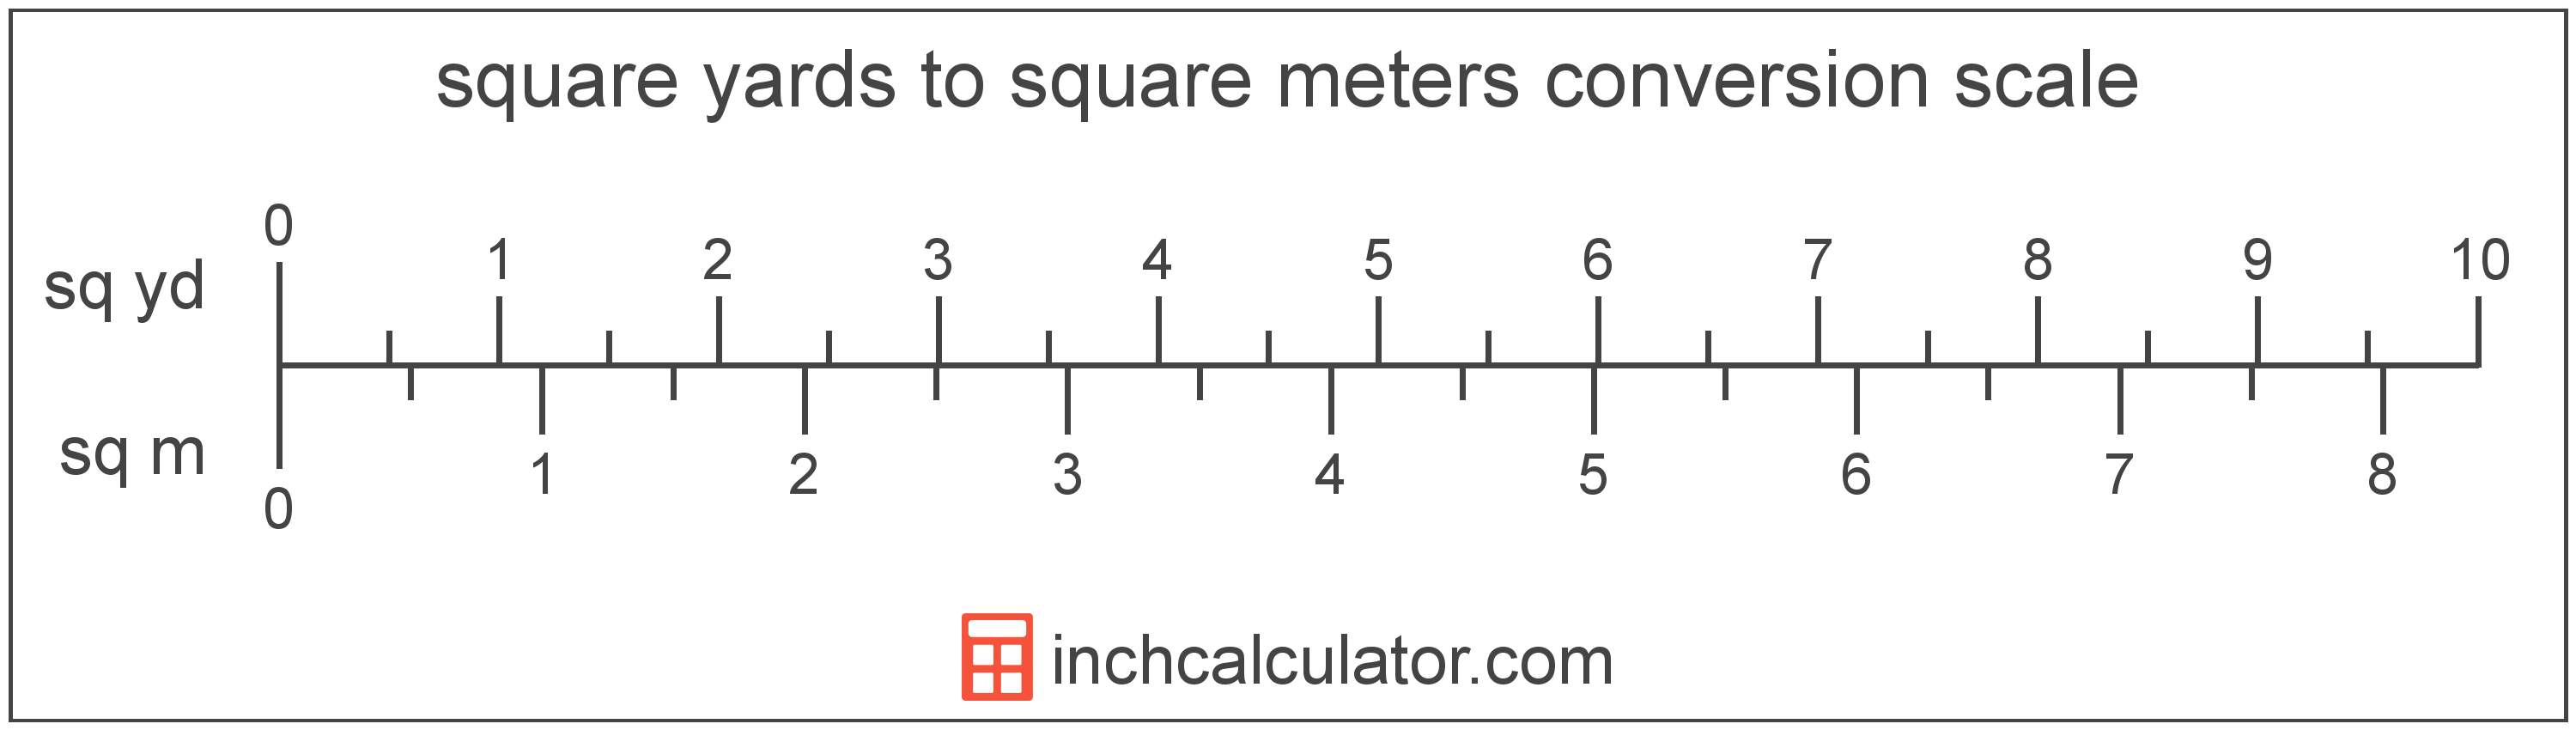 convert-square-meters-to-square-yards-sq-m-to-sq-yd